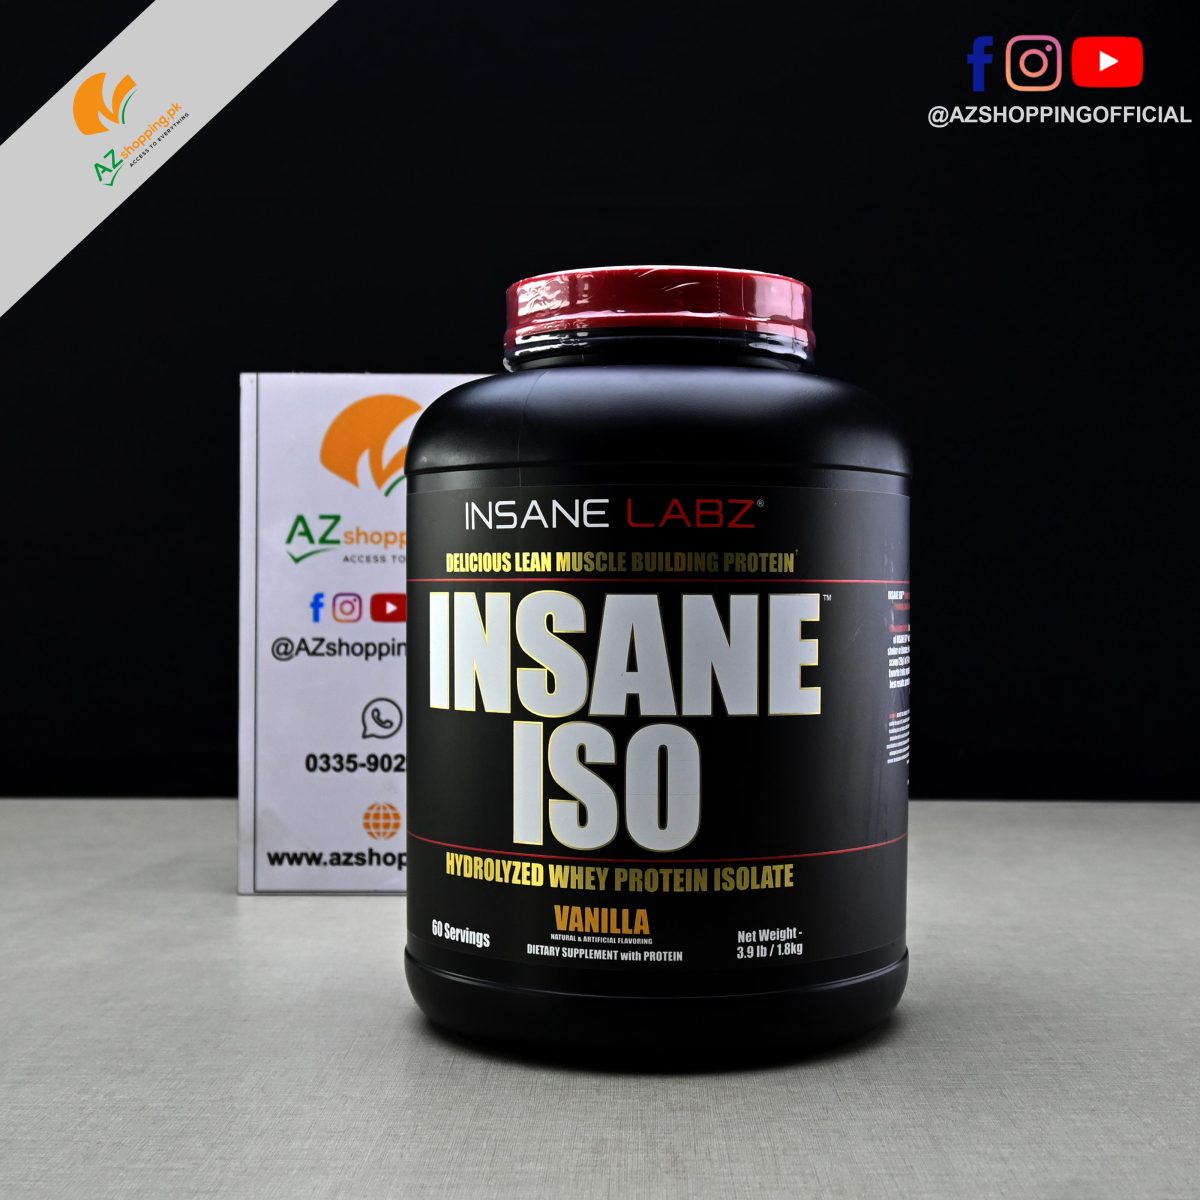 Insane Labz – Insane ISO Hydrolyzed Whey Protein Isolate for Lean Muscle Building – 60 Servings – 3.9 Lbs (1.8kg)